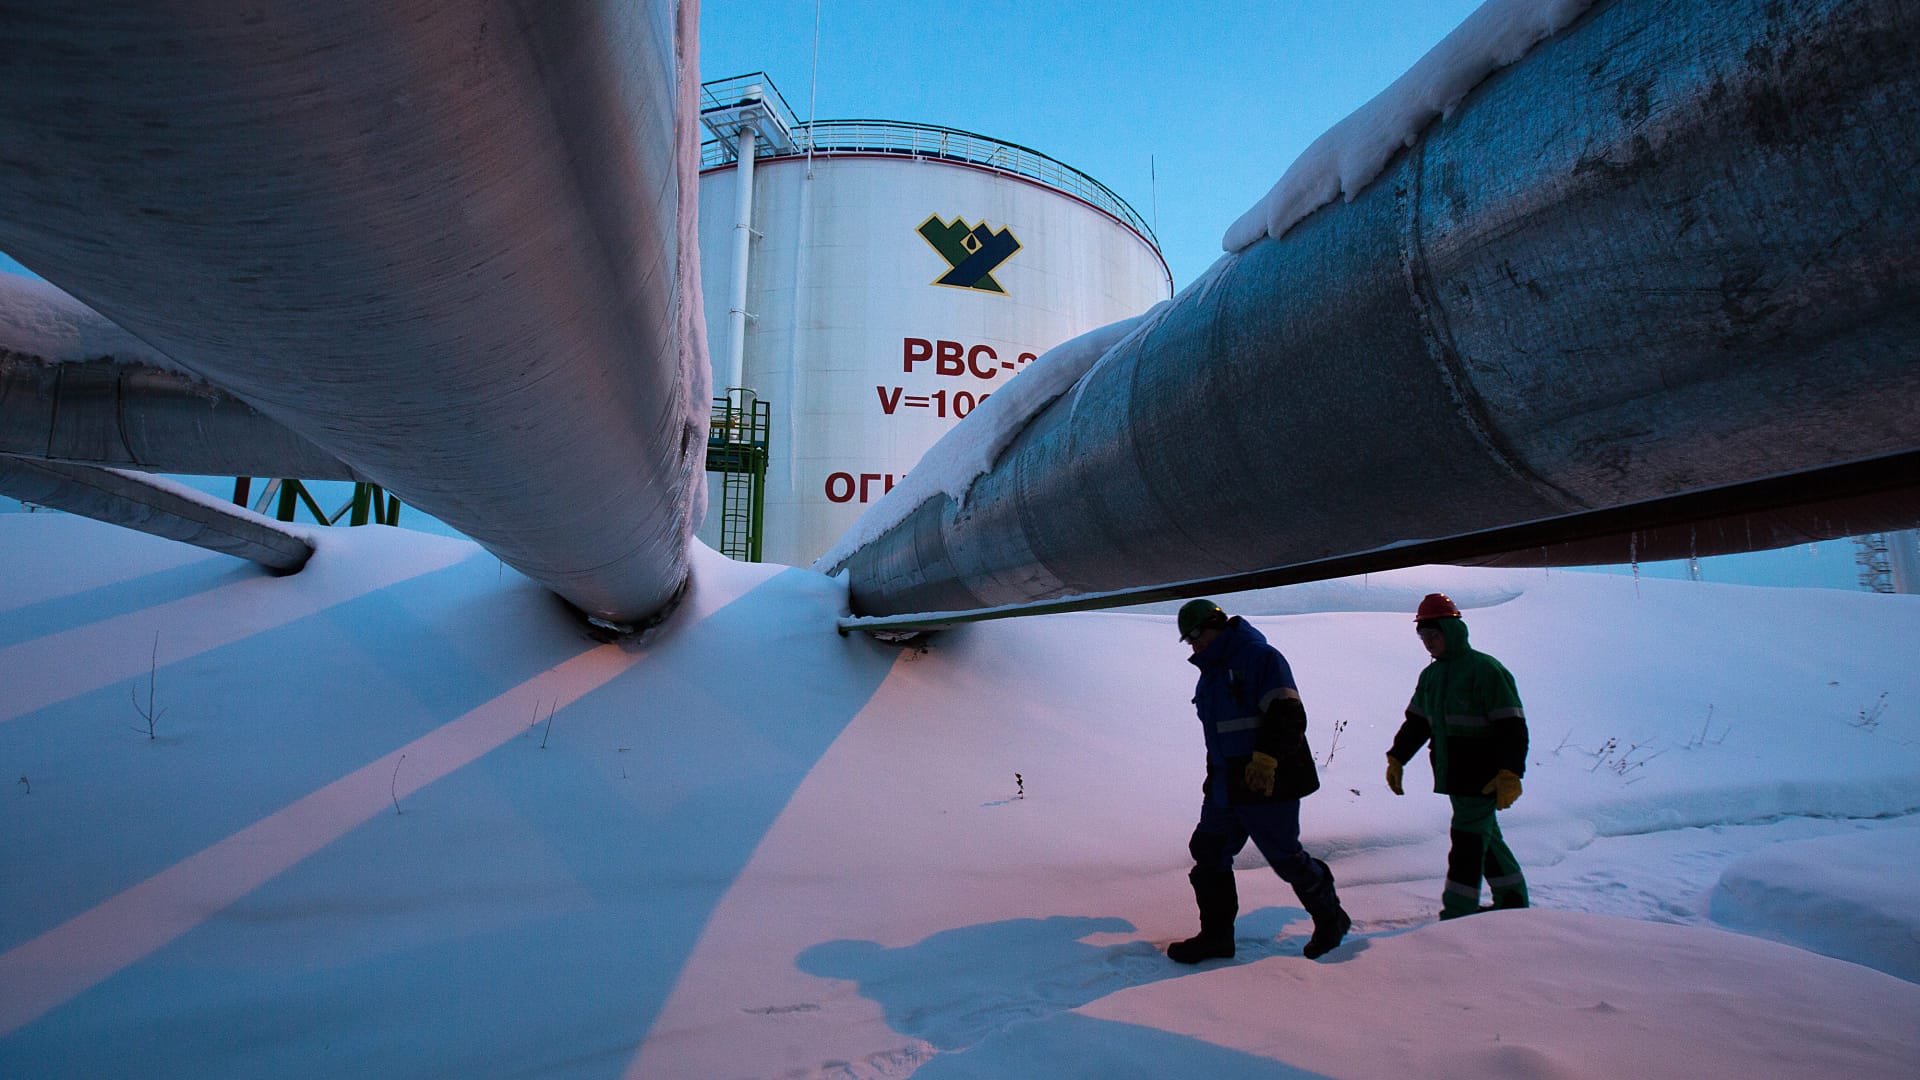 Russia is considering selling its oil and gas for bitcoin as sanctions intensify from the West